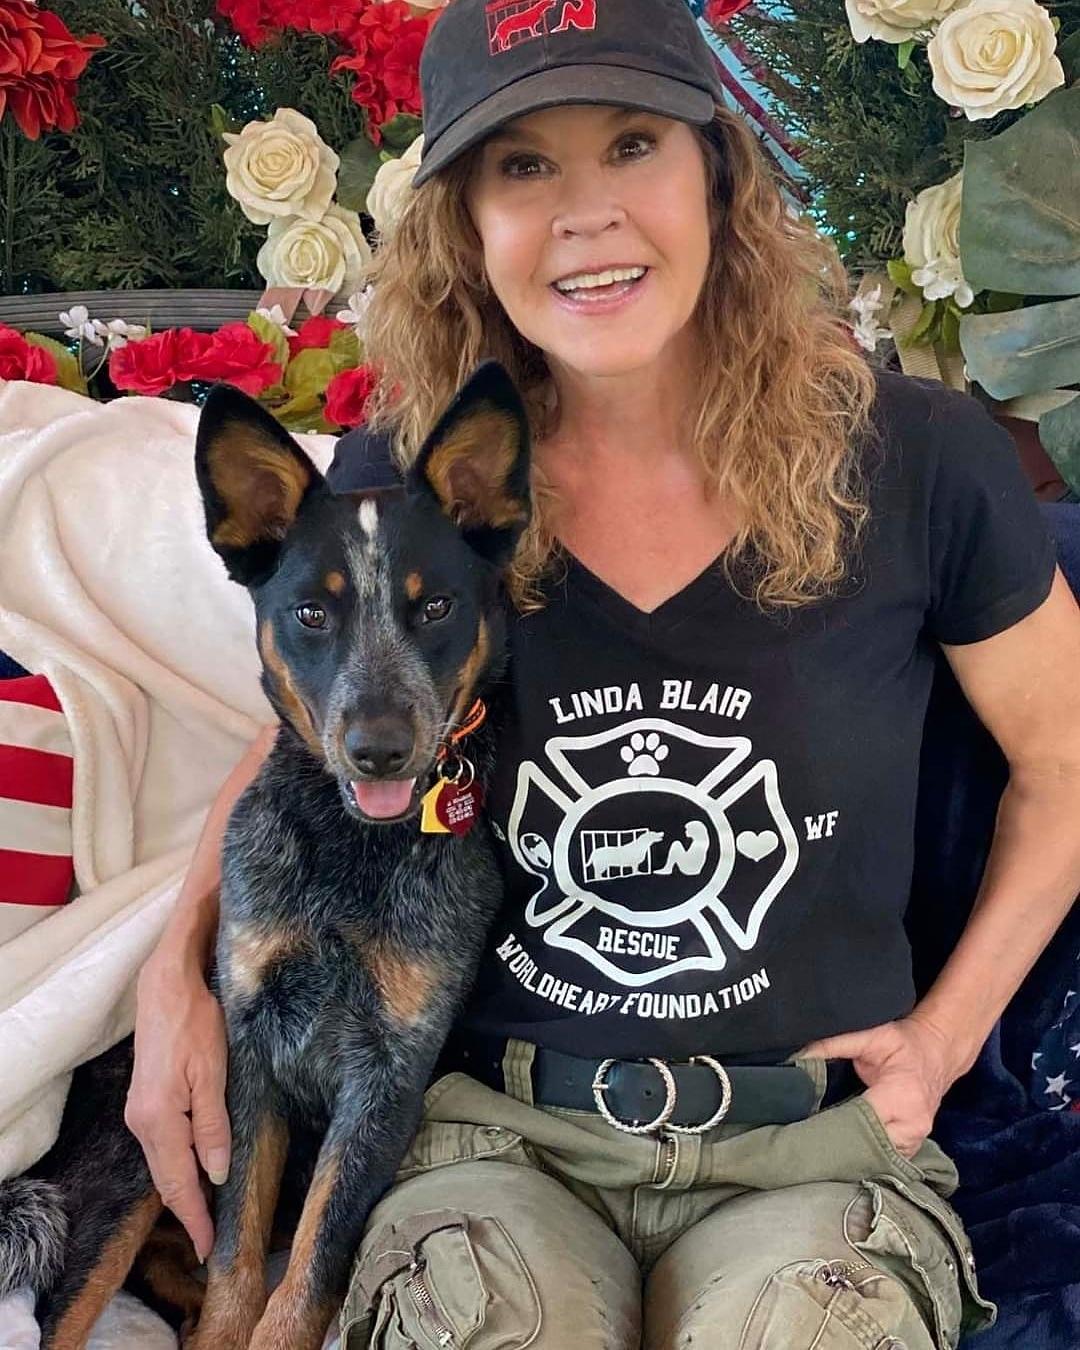 A photo showing Linda Blair posing with her dog.